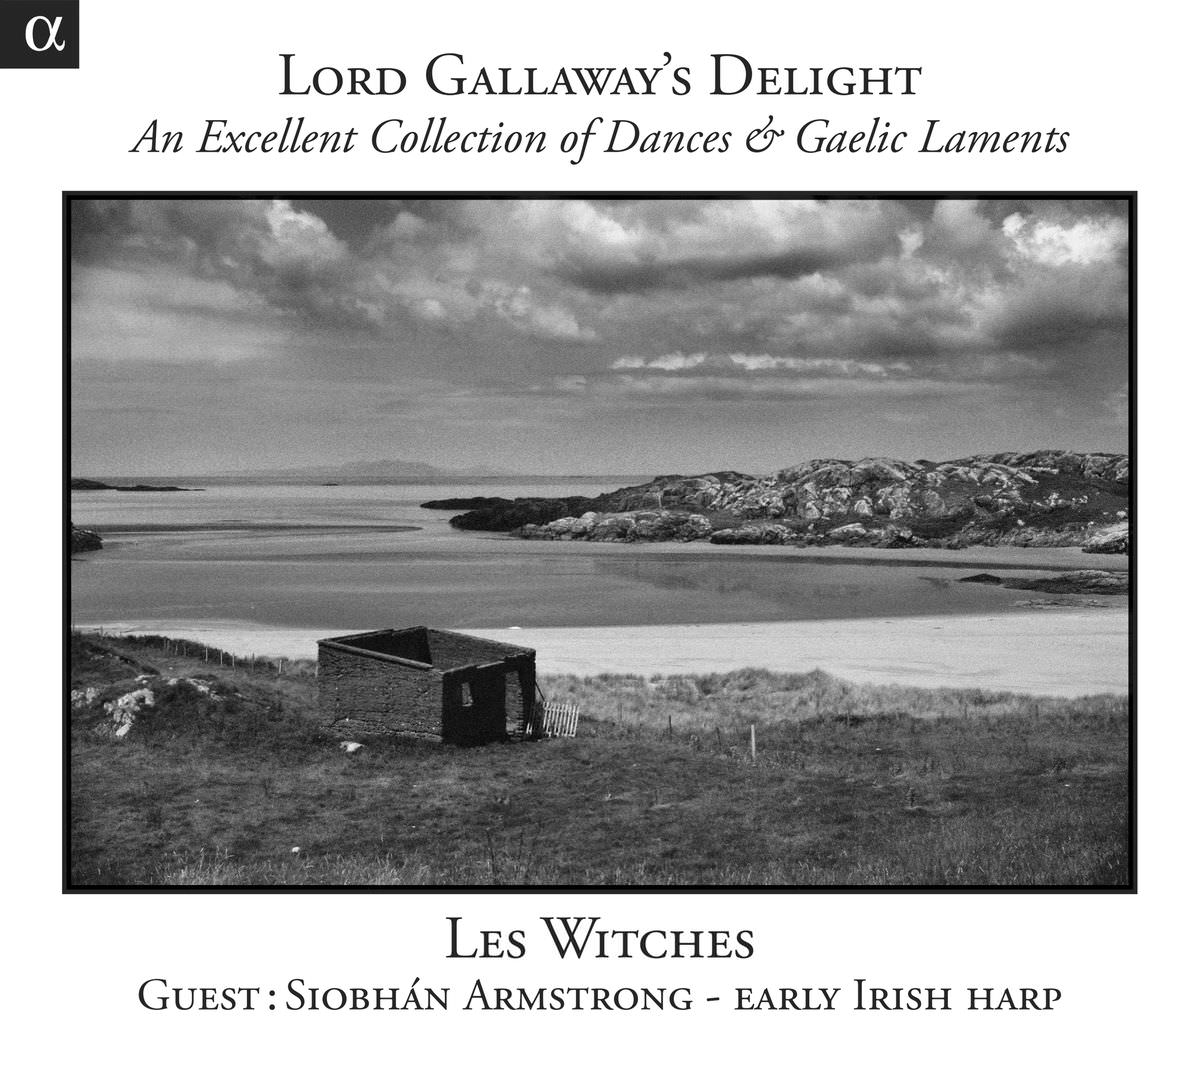 Les Witches & Siobhan Armstrong - Lord Gallaway’s Delight: An Excellent Collection of Dances & Gaelic Laments (2013) [FLAC 24bit/96kHz]